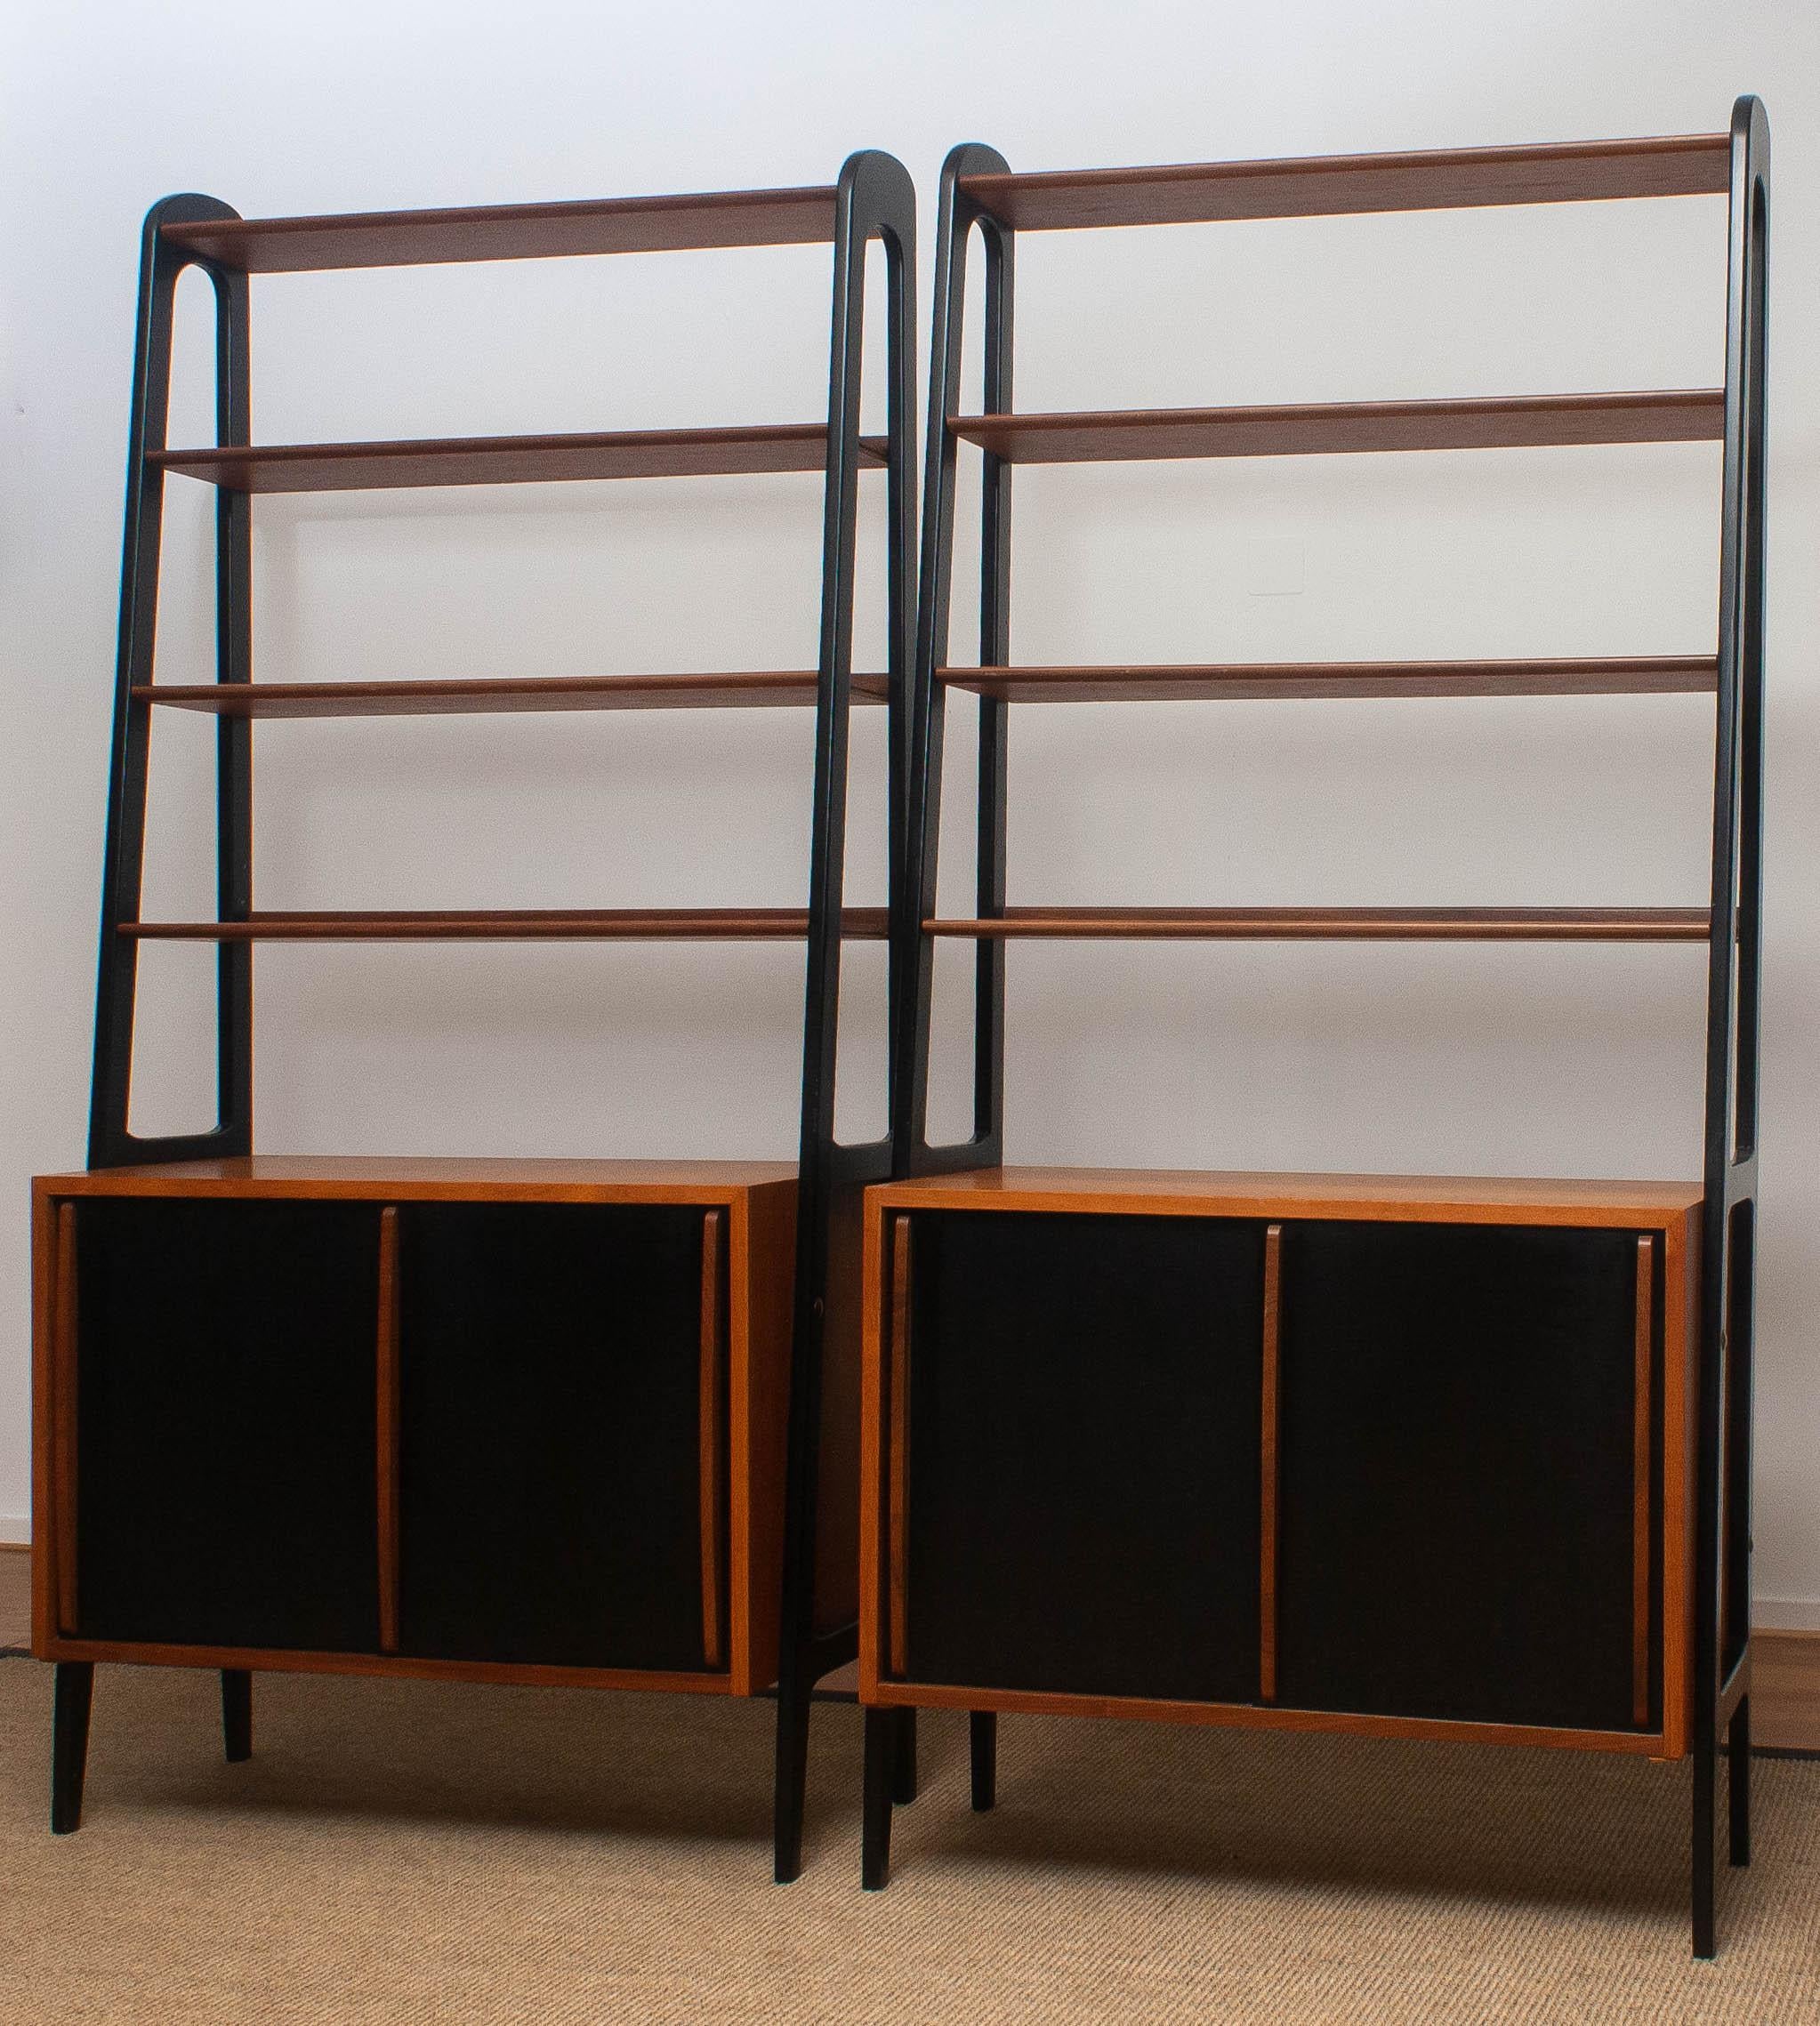 Two beautiful cabinets made of teak with black sliding doors and stands.
Because the cupboard is pretty slim and open to form it is also very suitable to use it as a room divider.
Each cabinet contains four shelves and a two-sliding door